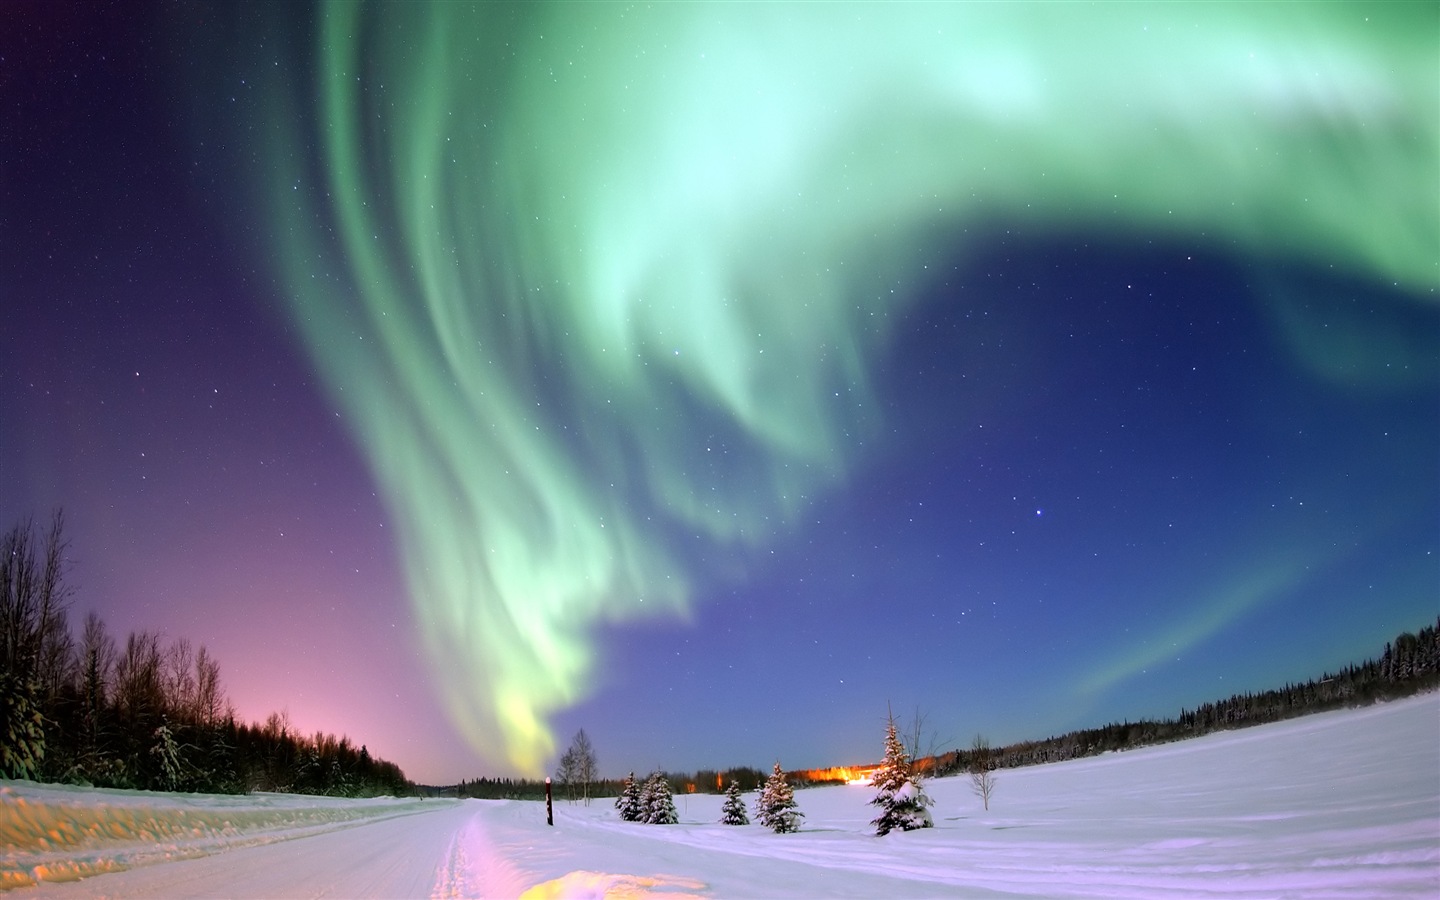 Natural wonders of the Northern Lights HD Wallpaper (2) #22 - 1440x900